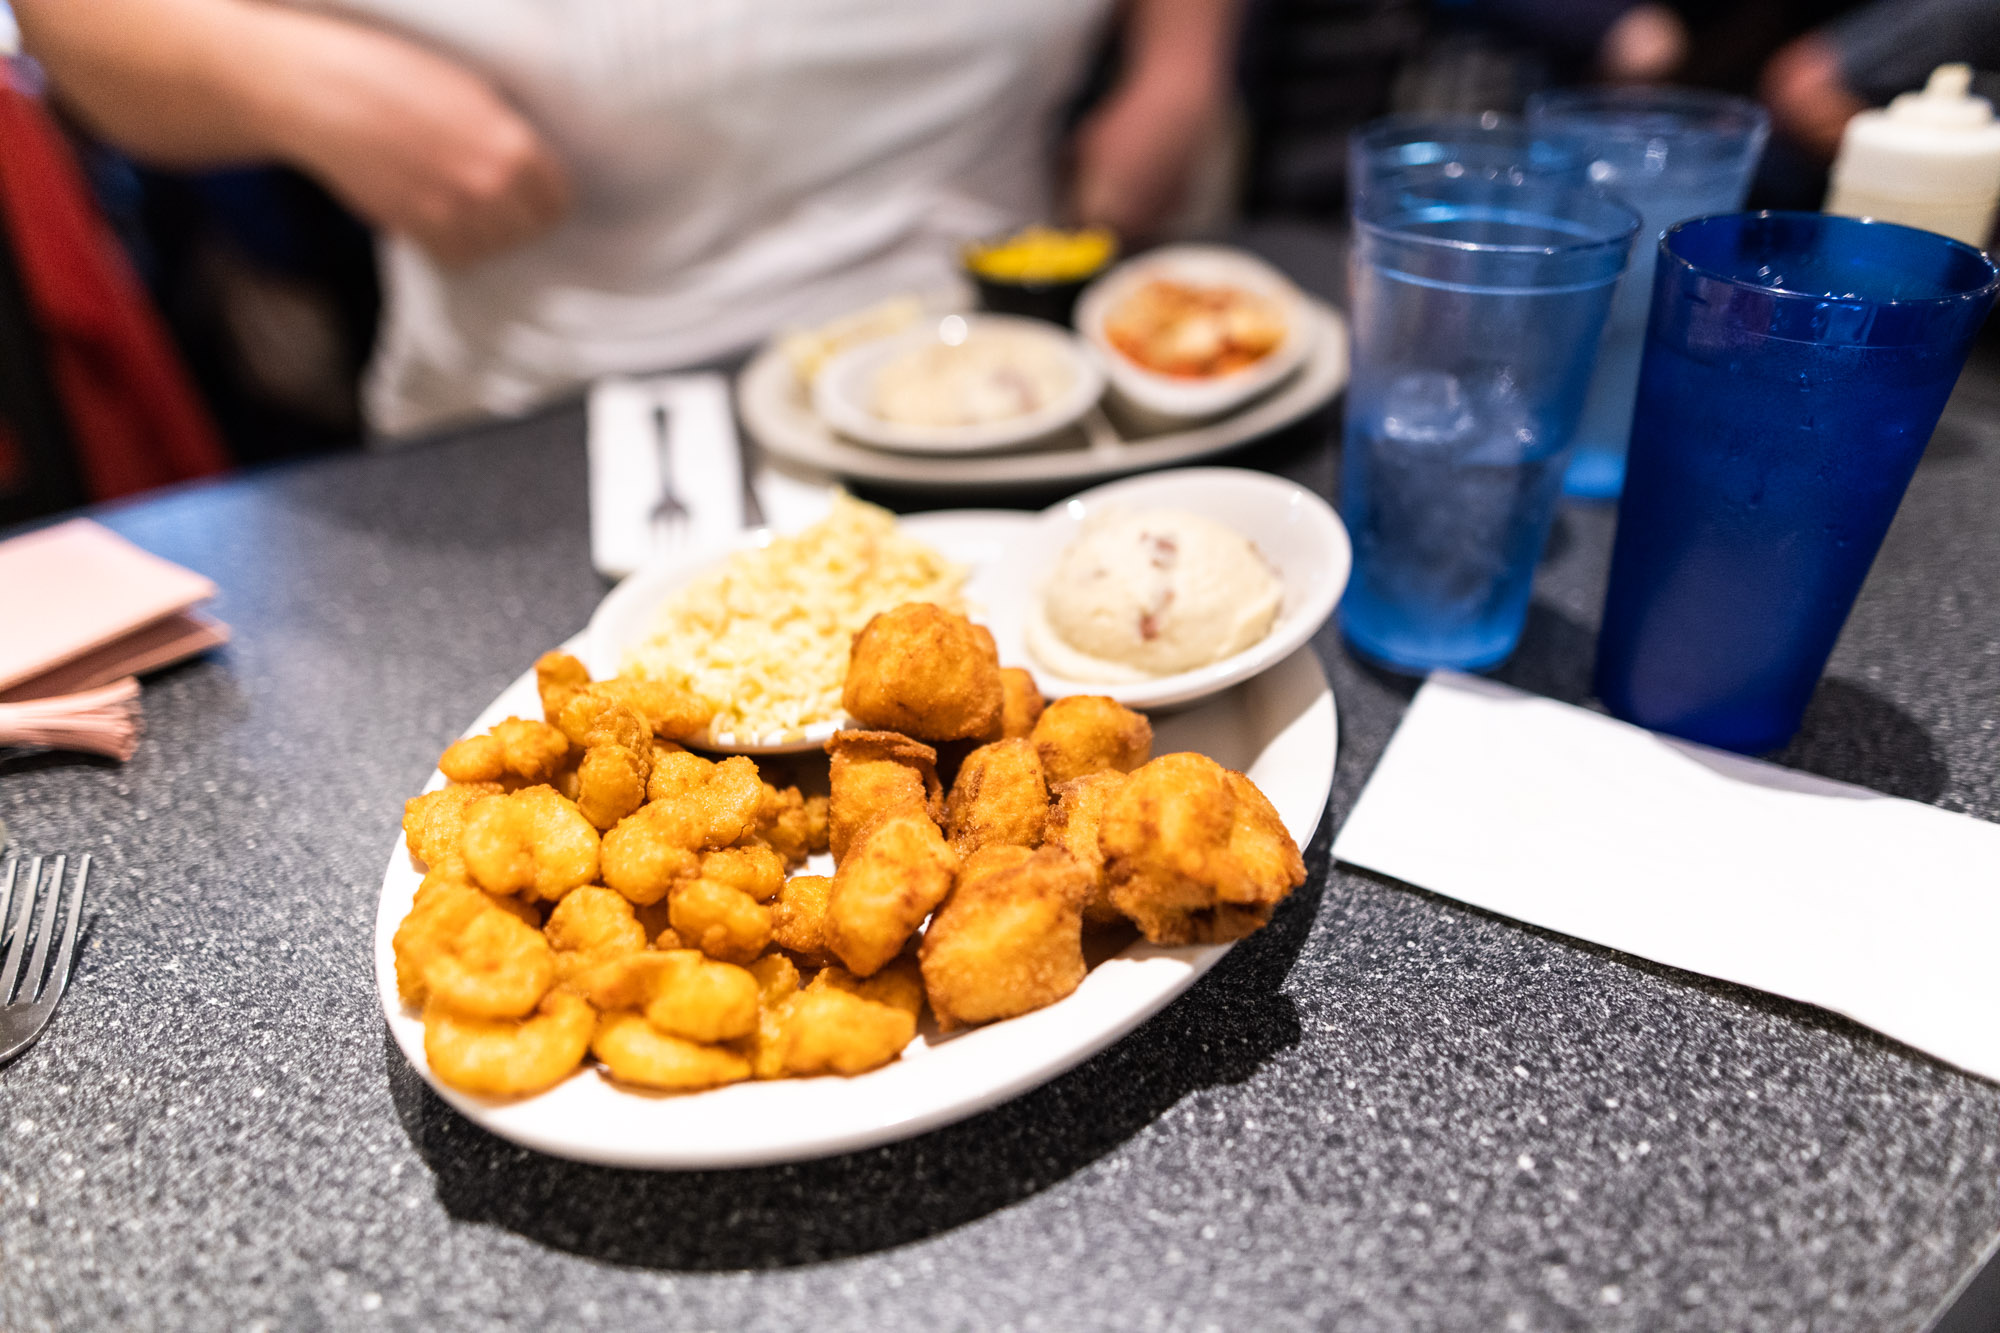 Huot's Seafood Restaurant - Saco - Maine - Best Things To Do In Maine - Jeff On The Road  - All photos are under Copyright  © 2019 Jeff Frenette Photography / dezjeff. To use the photos, please contact me at dezjeff@me.com.